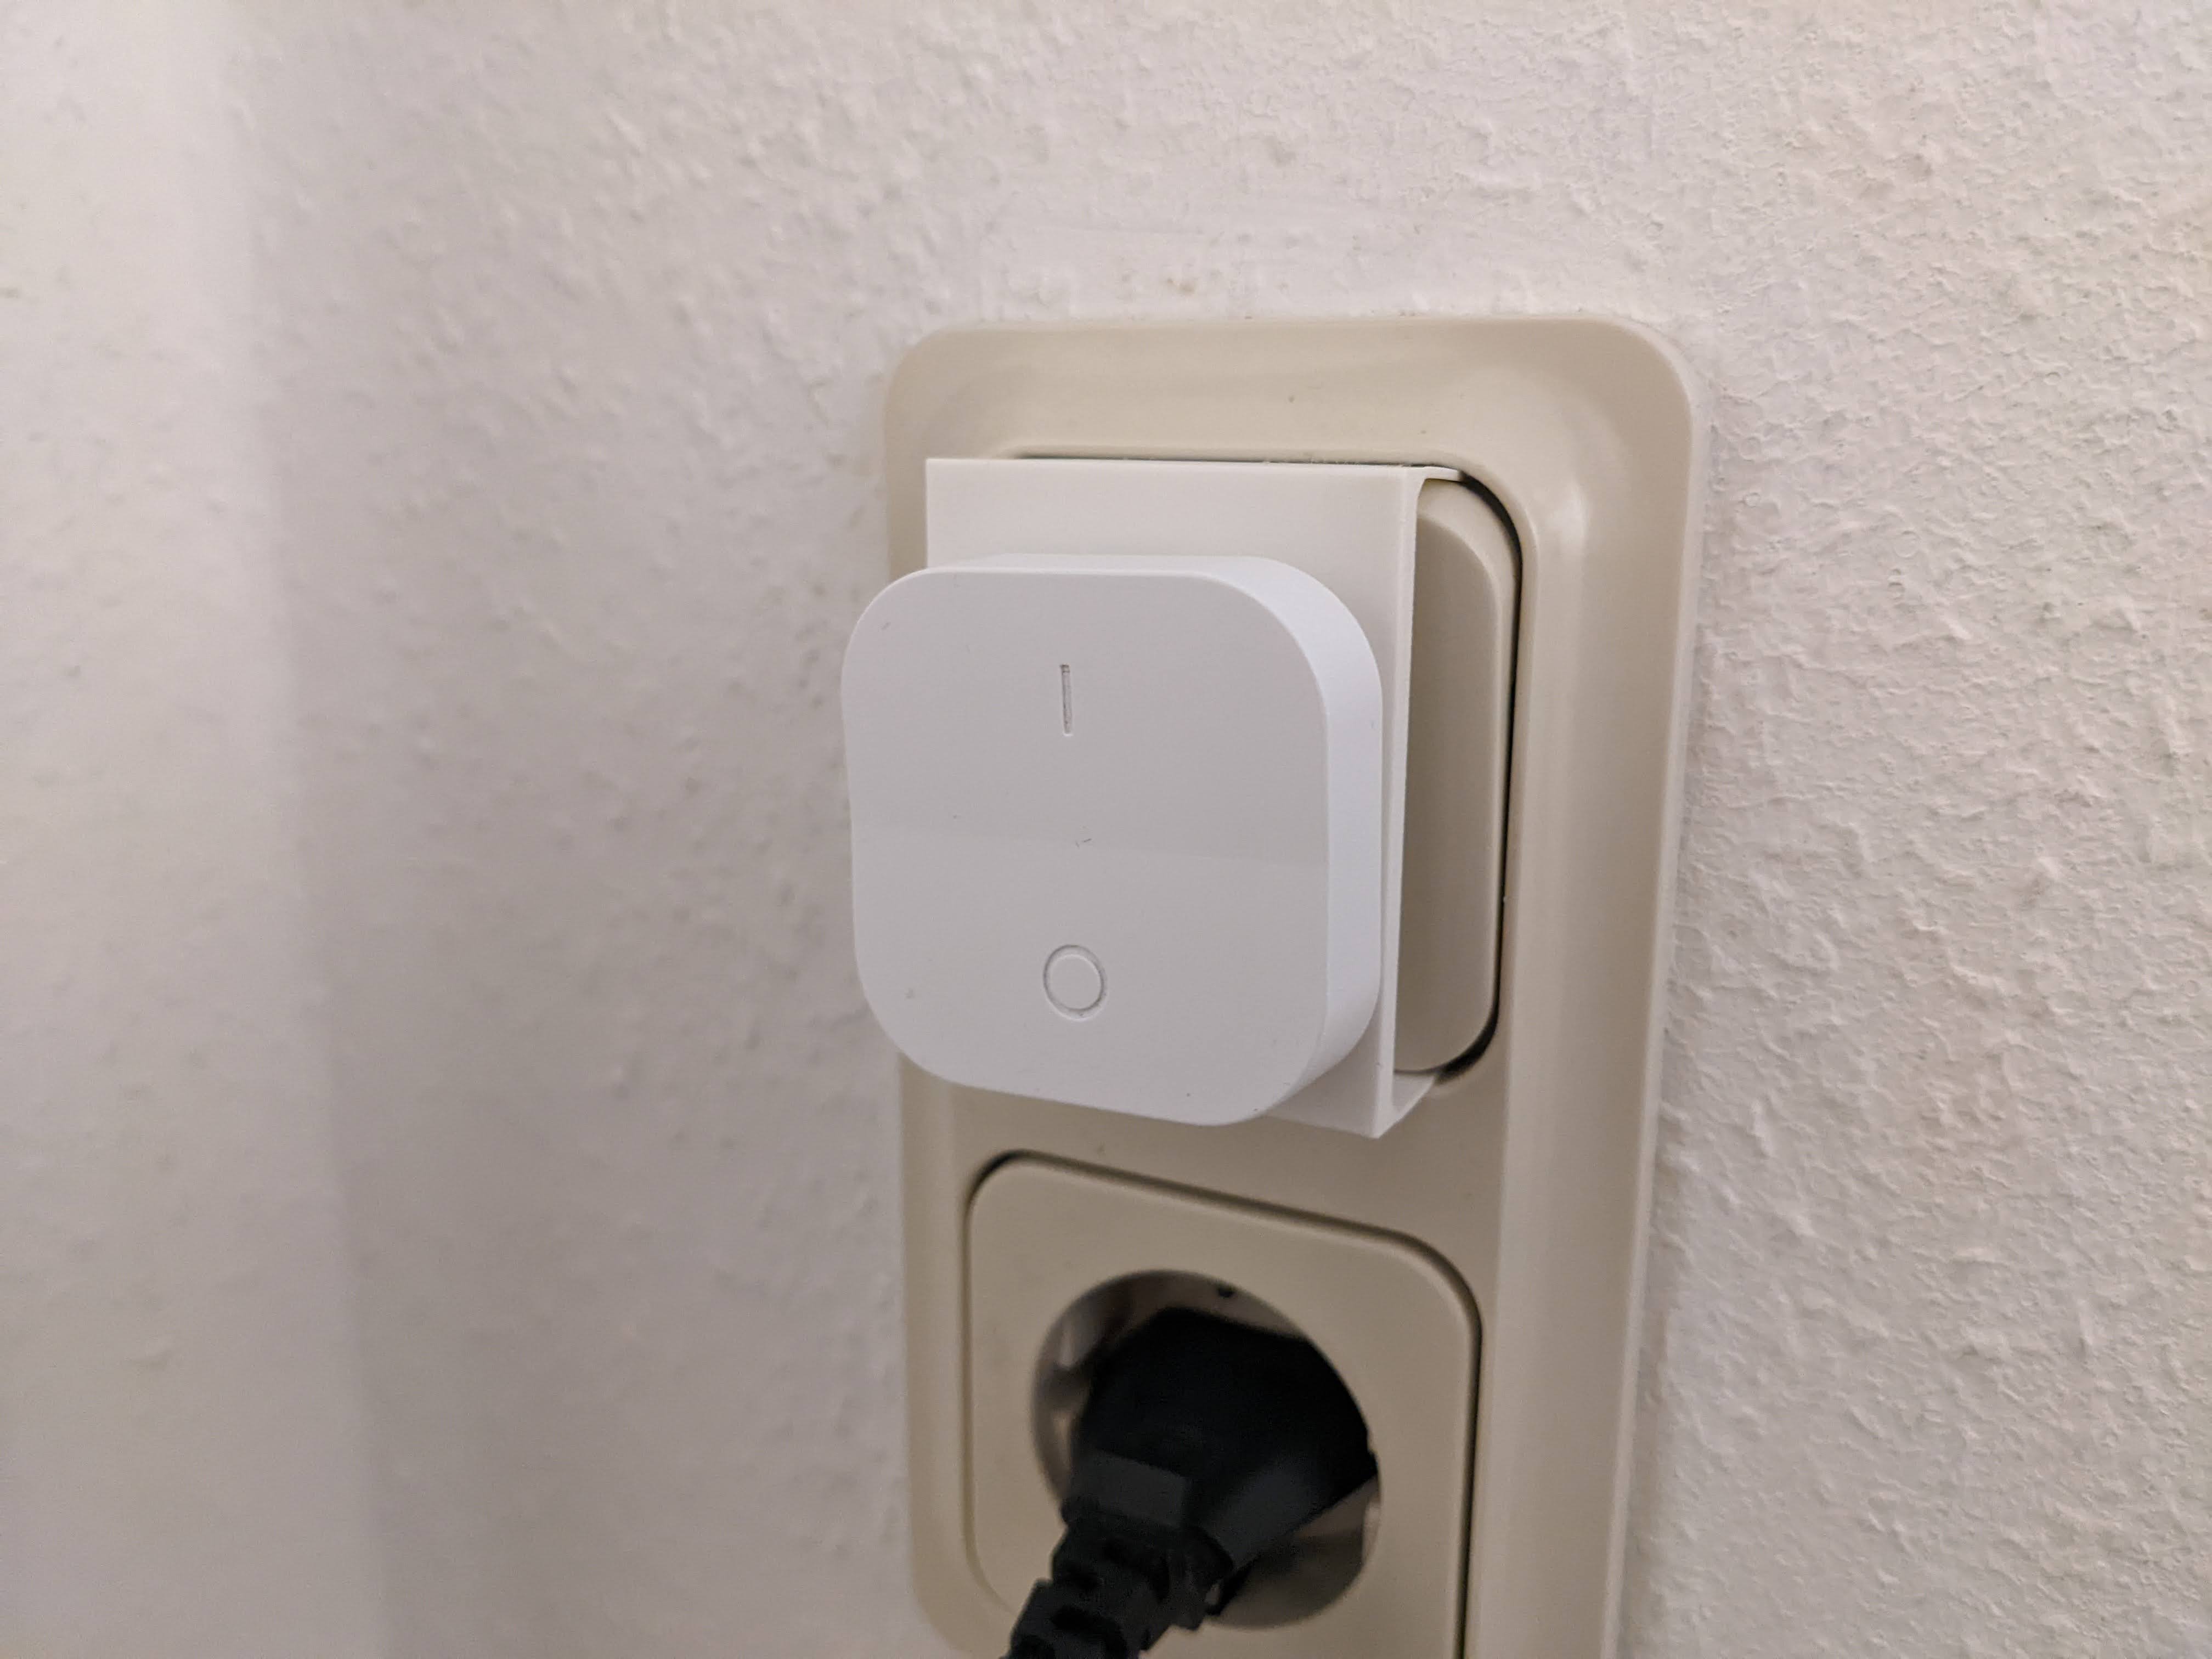 Tradfri Switch Mount Cover for existing Switch